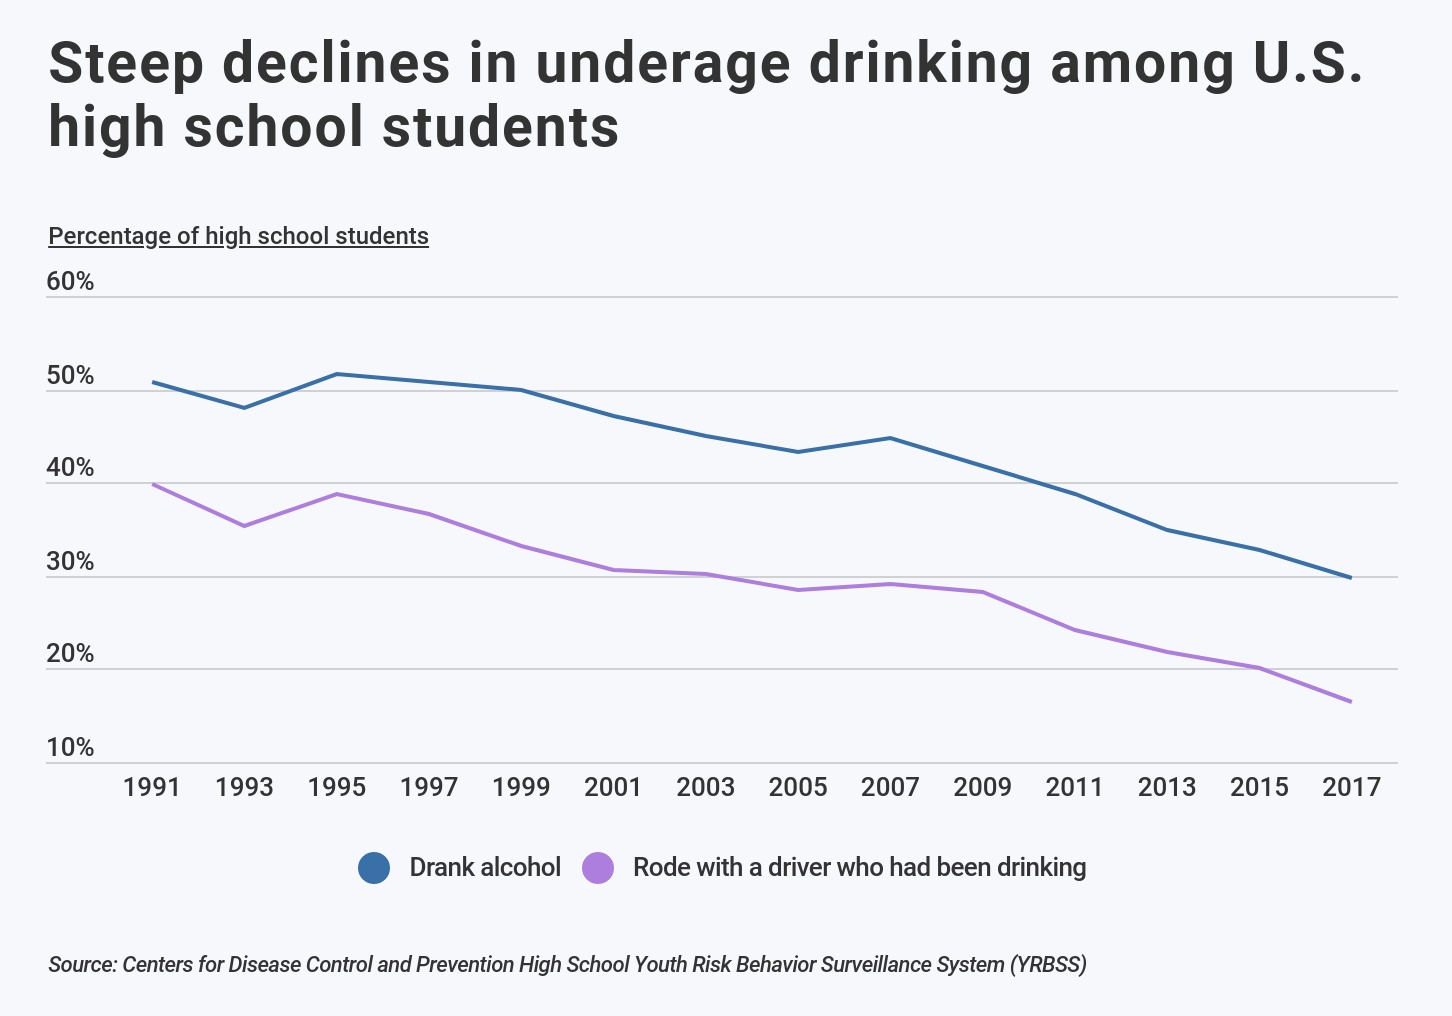 Line graph showing decline in U.S. underage drinking over time